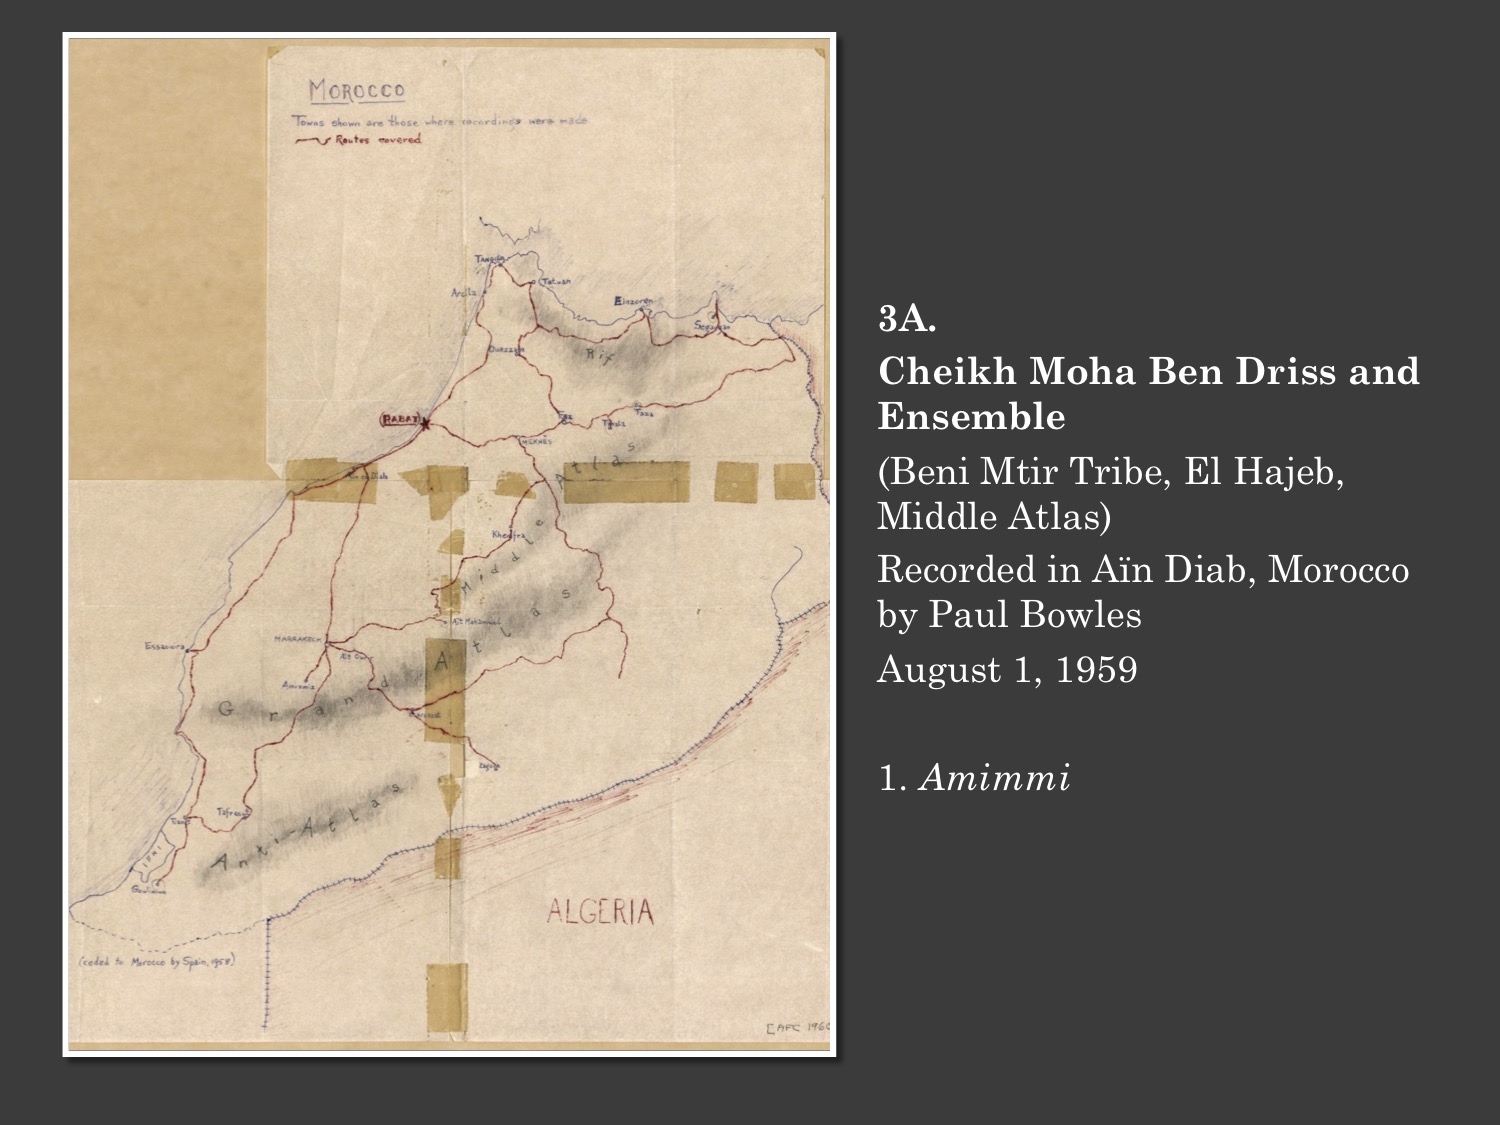 3A.
Moha ben Driss and Ensemble. (El Hajeb, Middle Atlas, Beni Mitr Tribe)
Amimmi
Recorded in Aïn Diab, Morocco on August 1, 1959 by Paul Bowles
